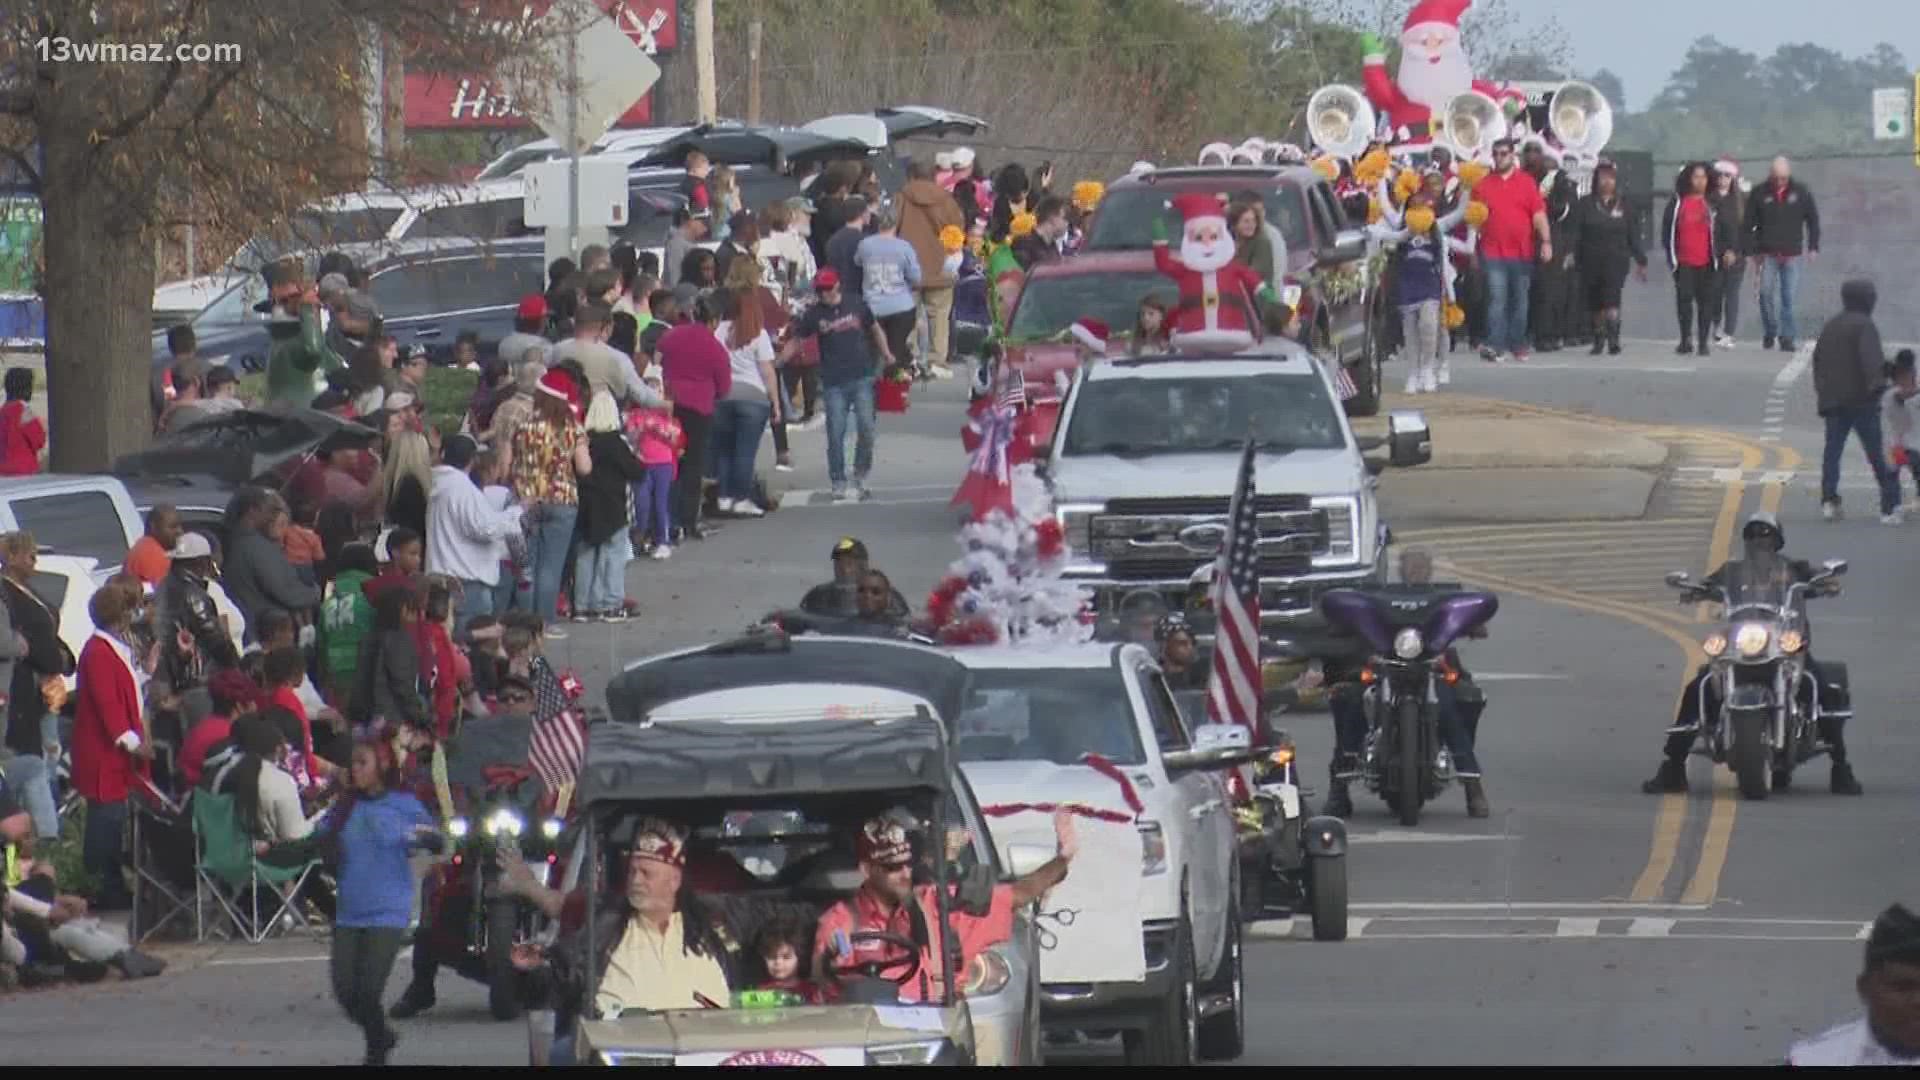 The parade started at 3:30 p.m. Sunday and lasted for nearly two hours.